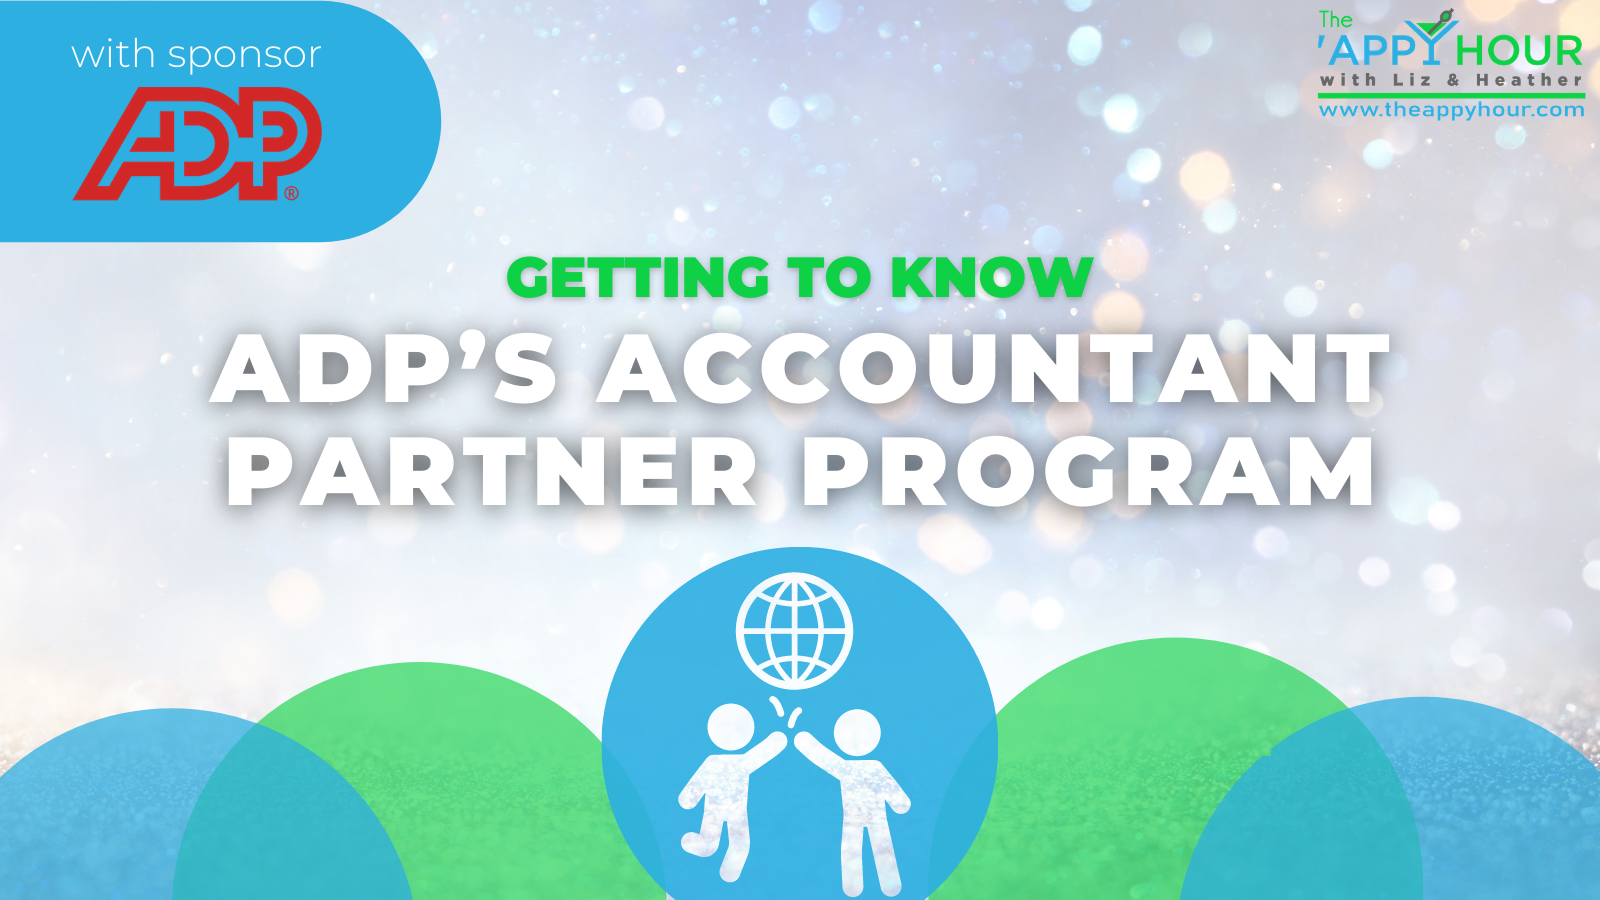 Getting to Know ADP’s Accountant Partner Program